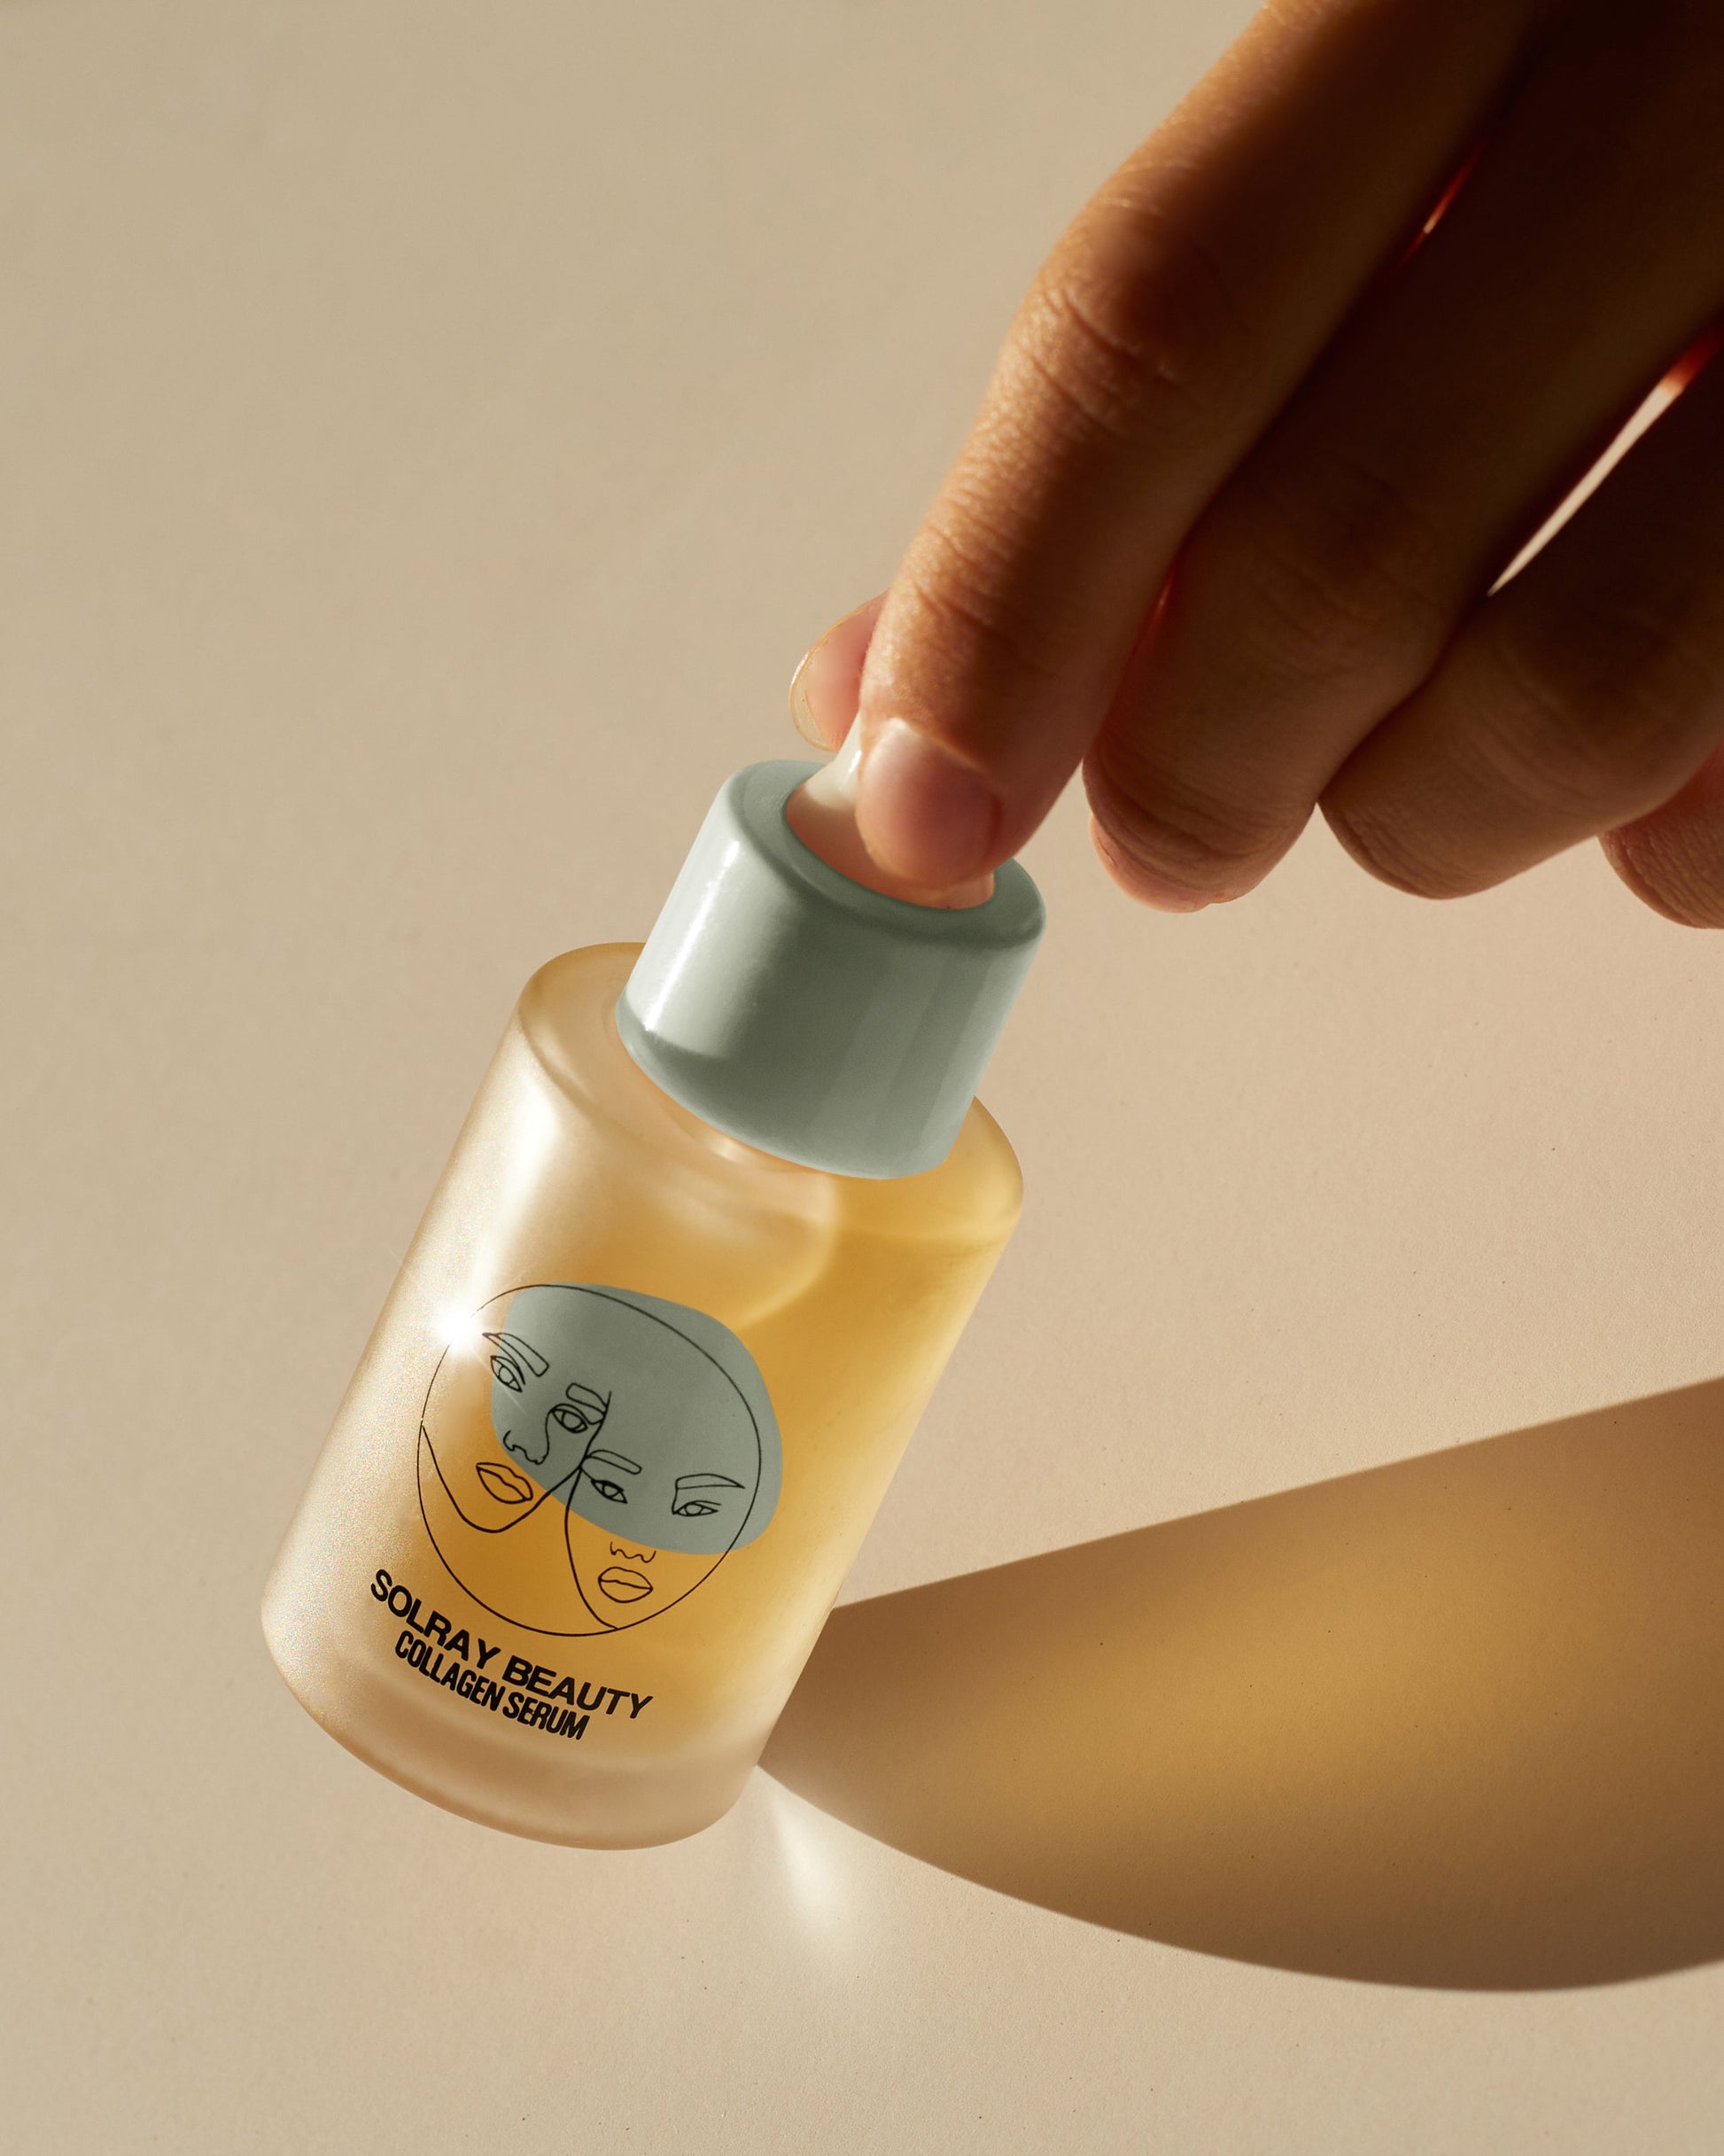 SolRay Beauty's Collagen Serum bottle with the SolRay Beauty logo prominently displayed on the label.